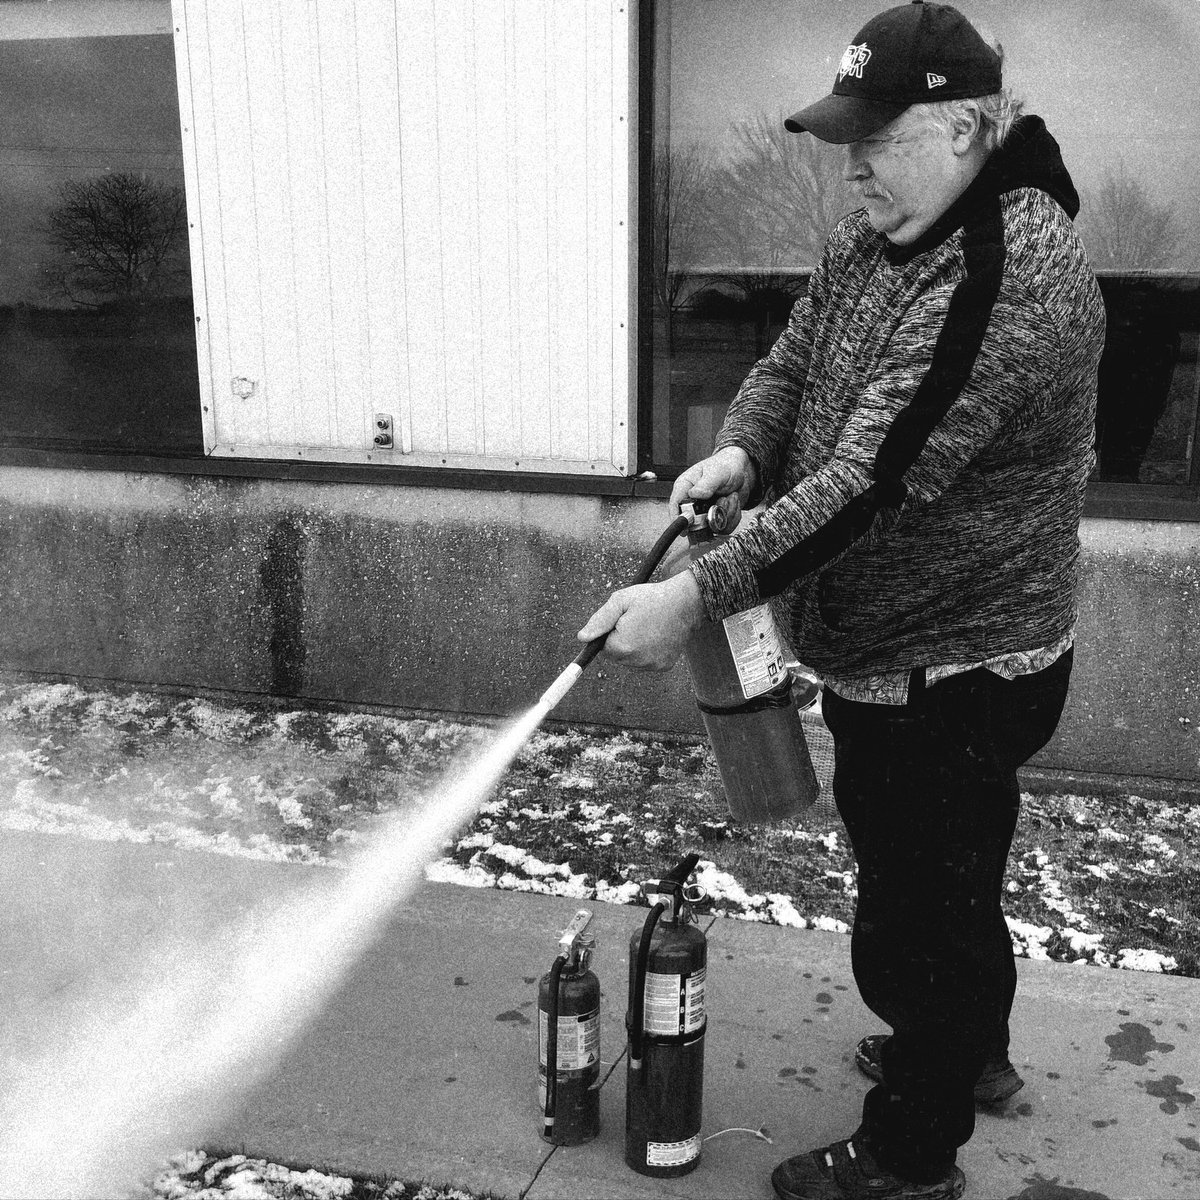 Pull, Aim, Squeeze & Sweep.🔥🧯 
#firehousetraining #workplacesafety #safetytraining #fireprevention #firesafetyplan #inspection #fireextinguishertraining